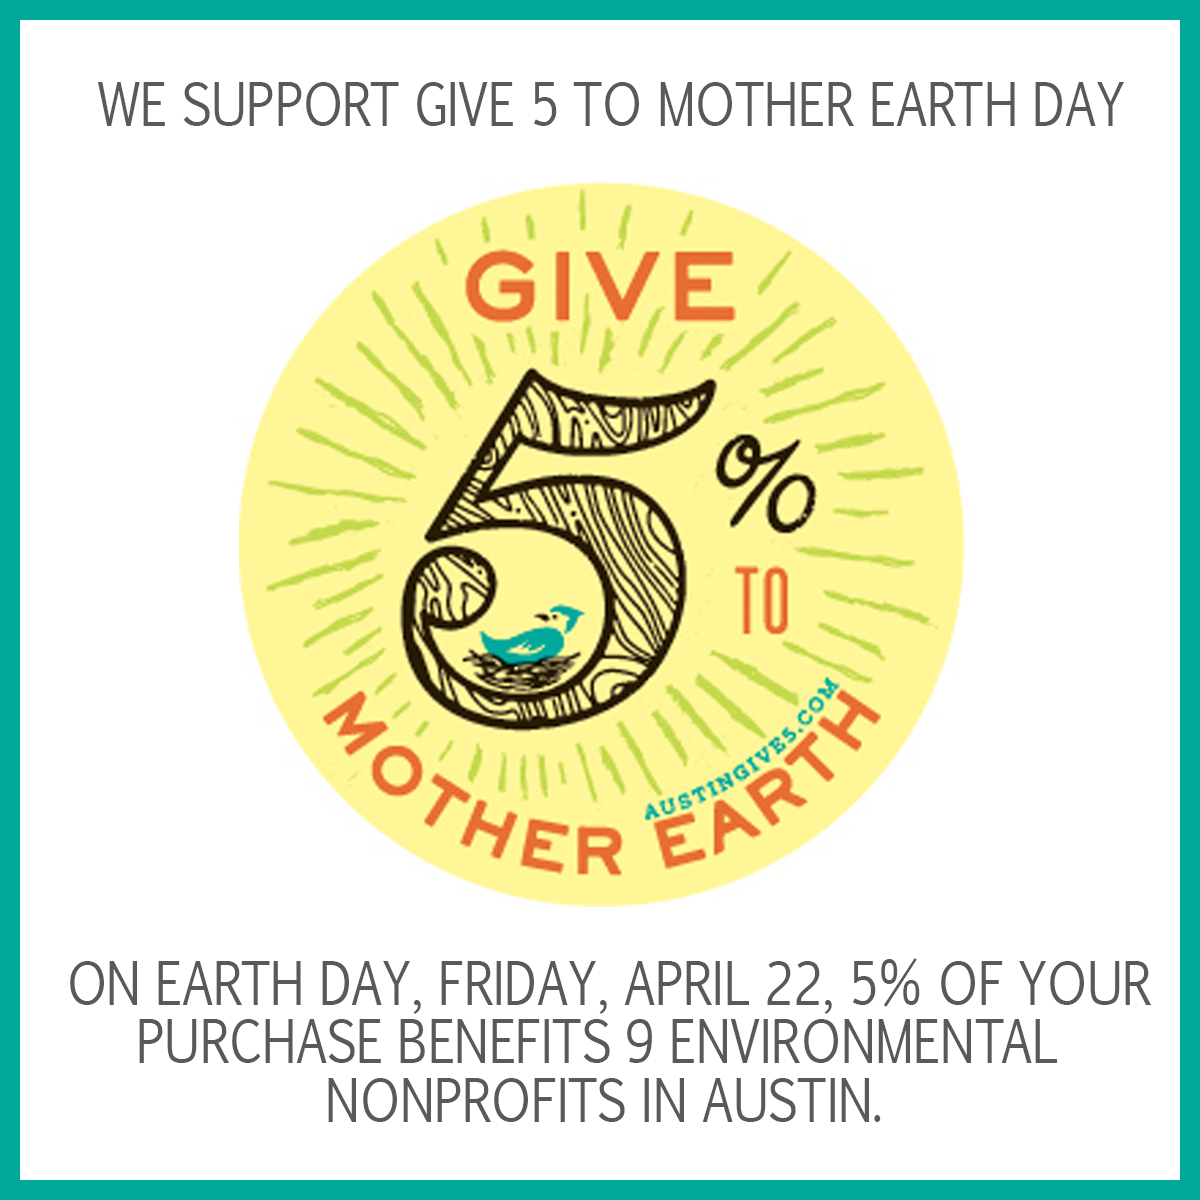 give 5 to mother earth campaign logo